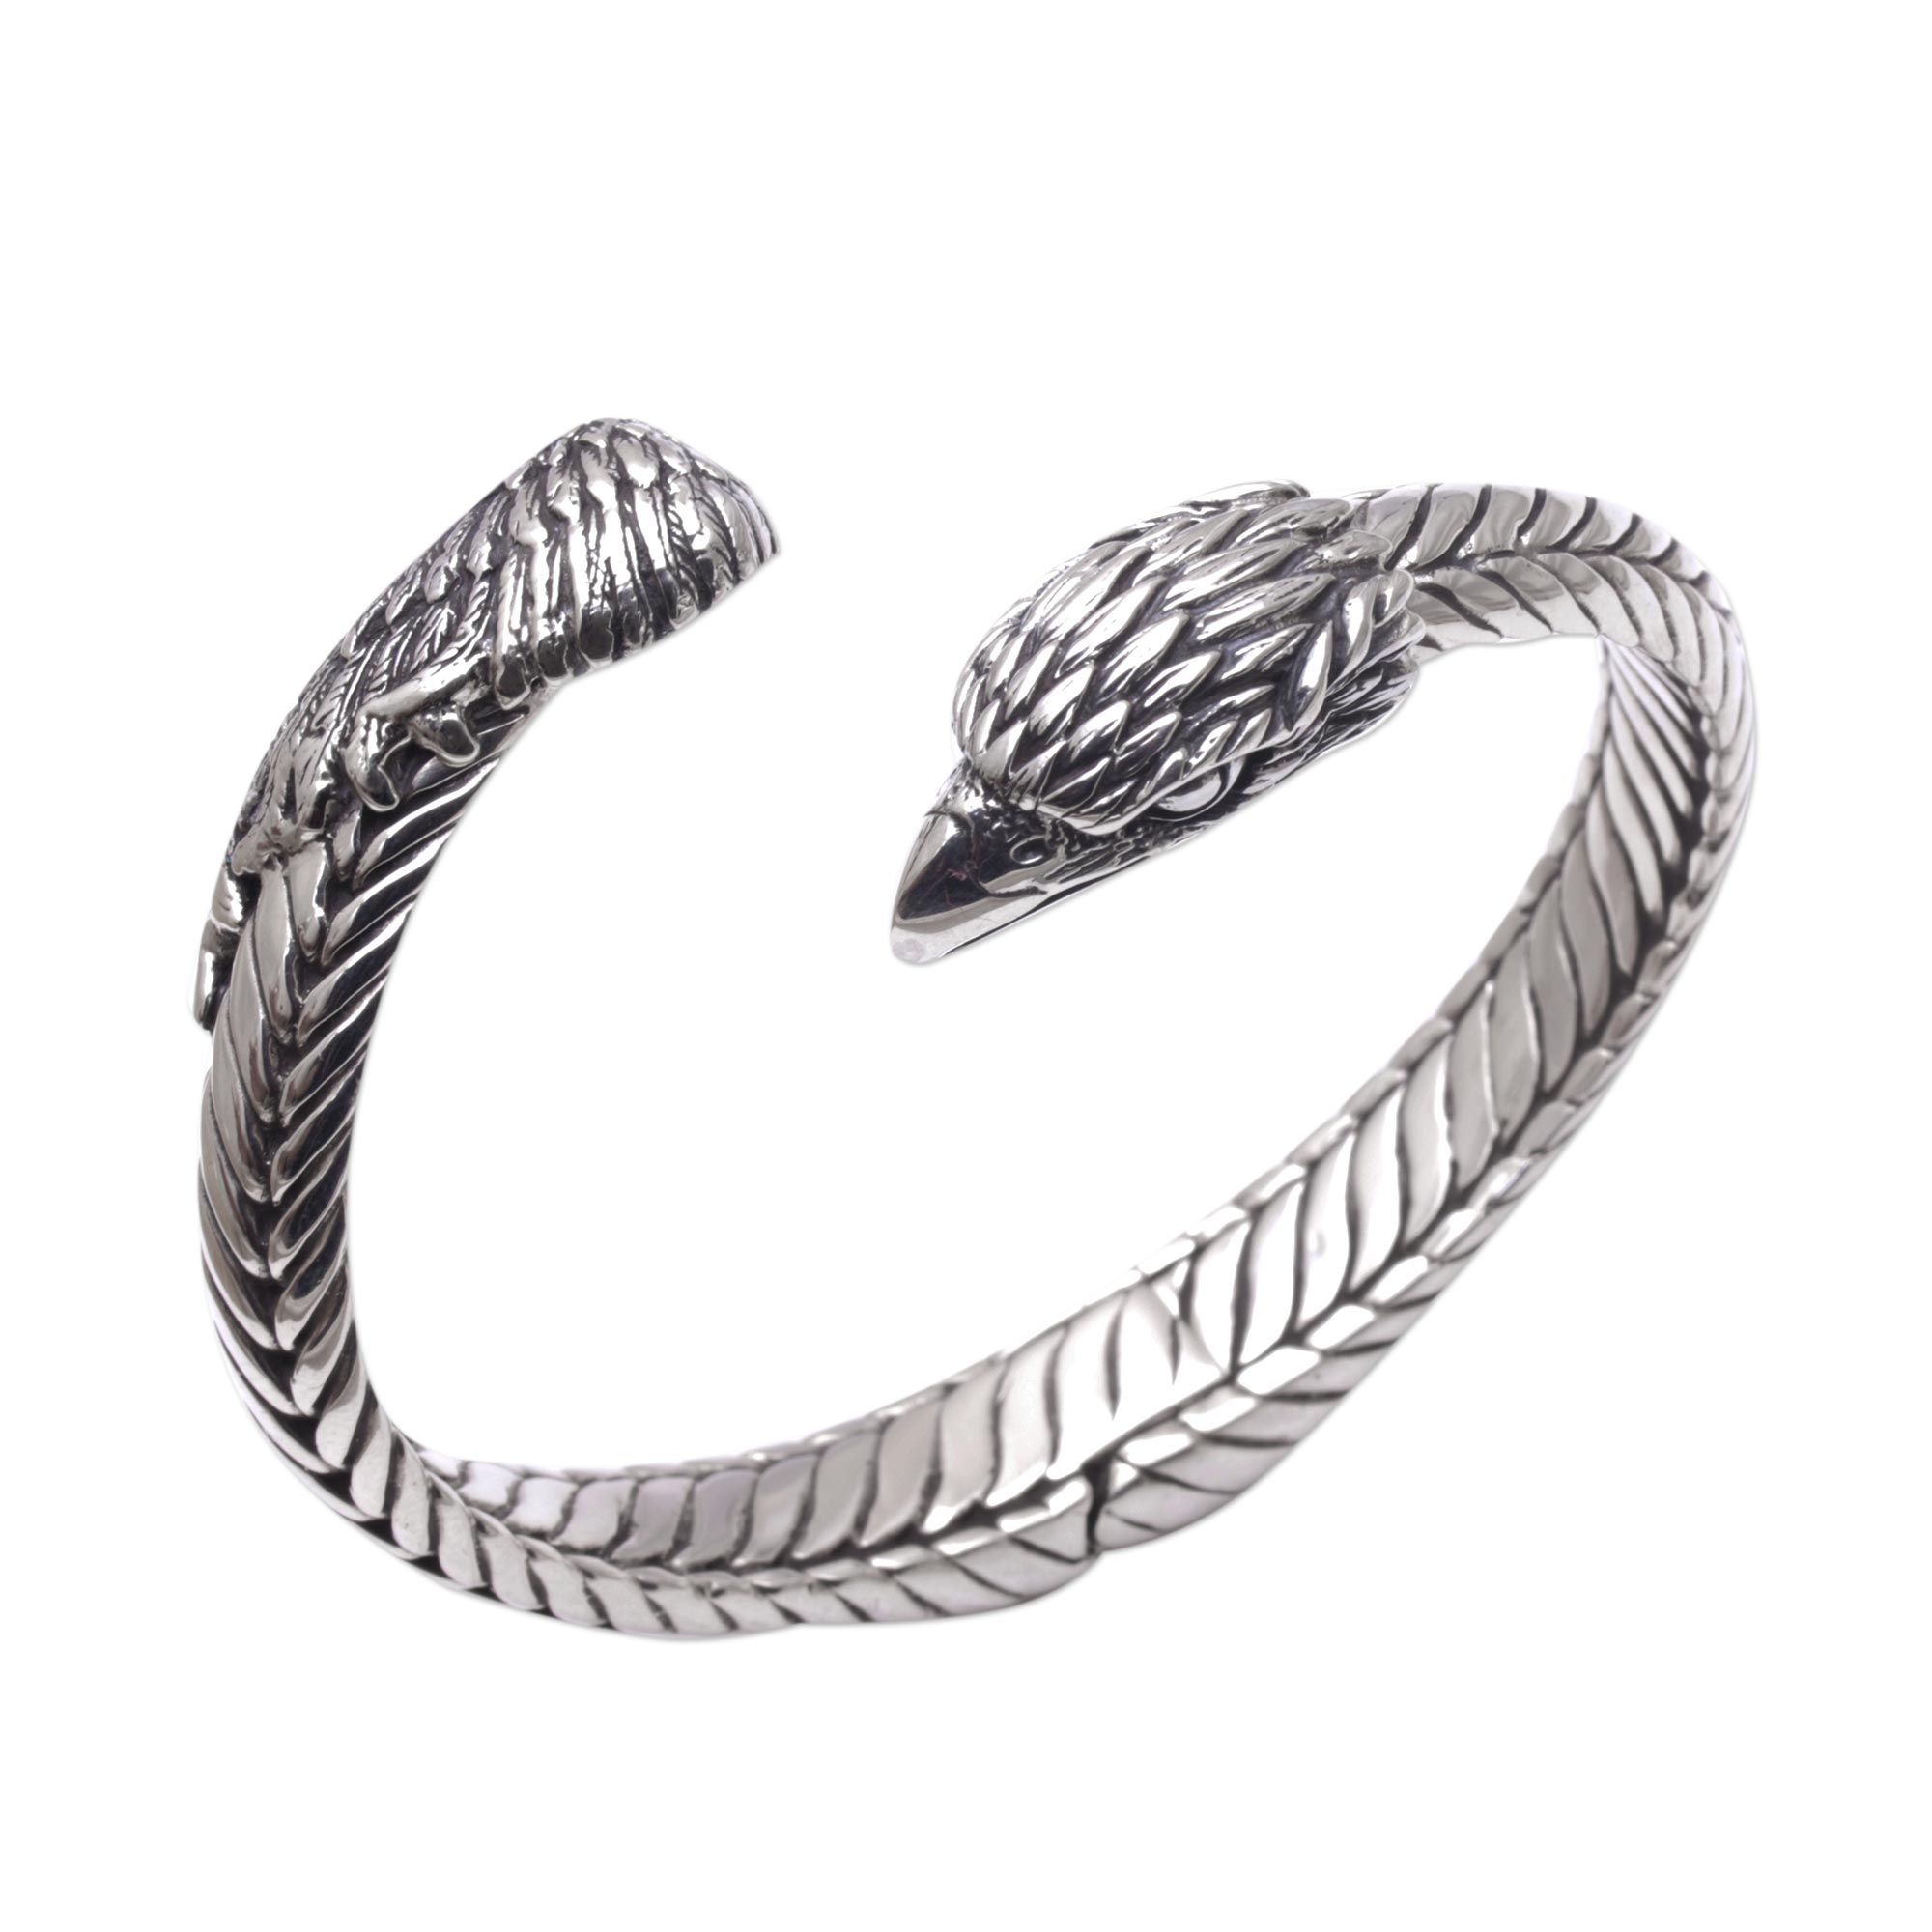 Unisex Sterling Silver Eagle Cuff Bracelet from Indonesia - Magnificent ...